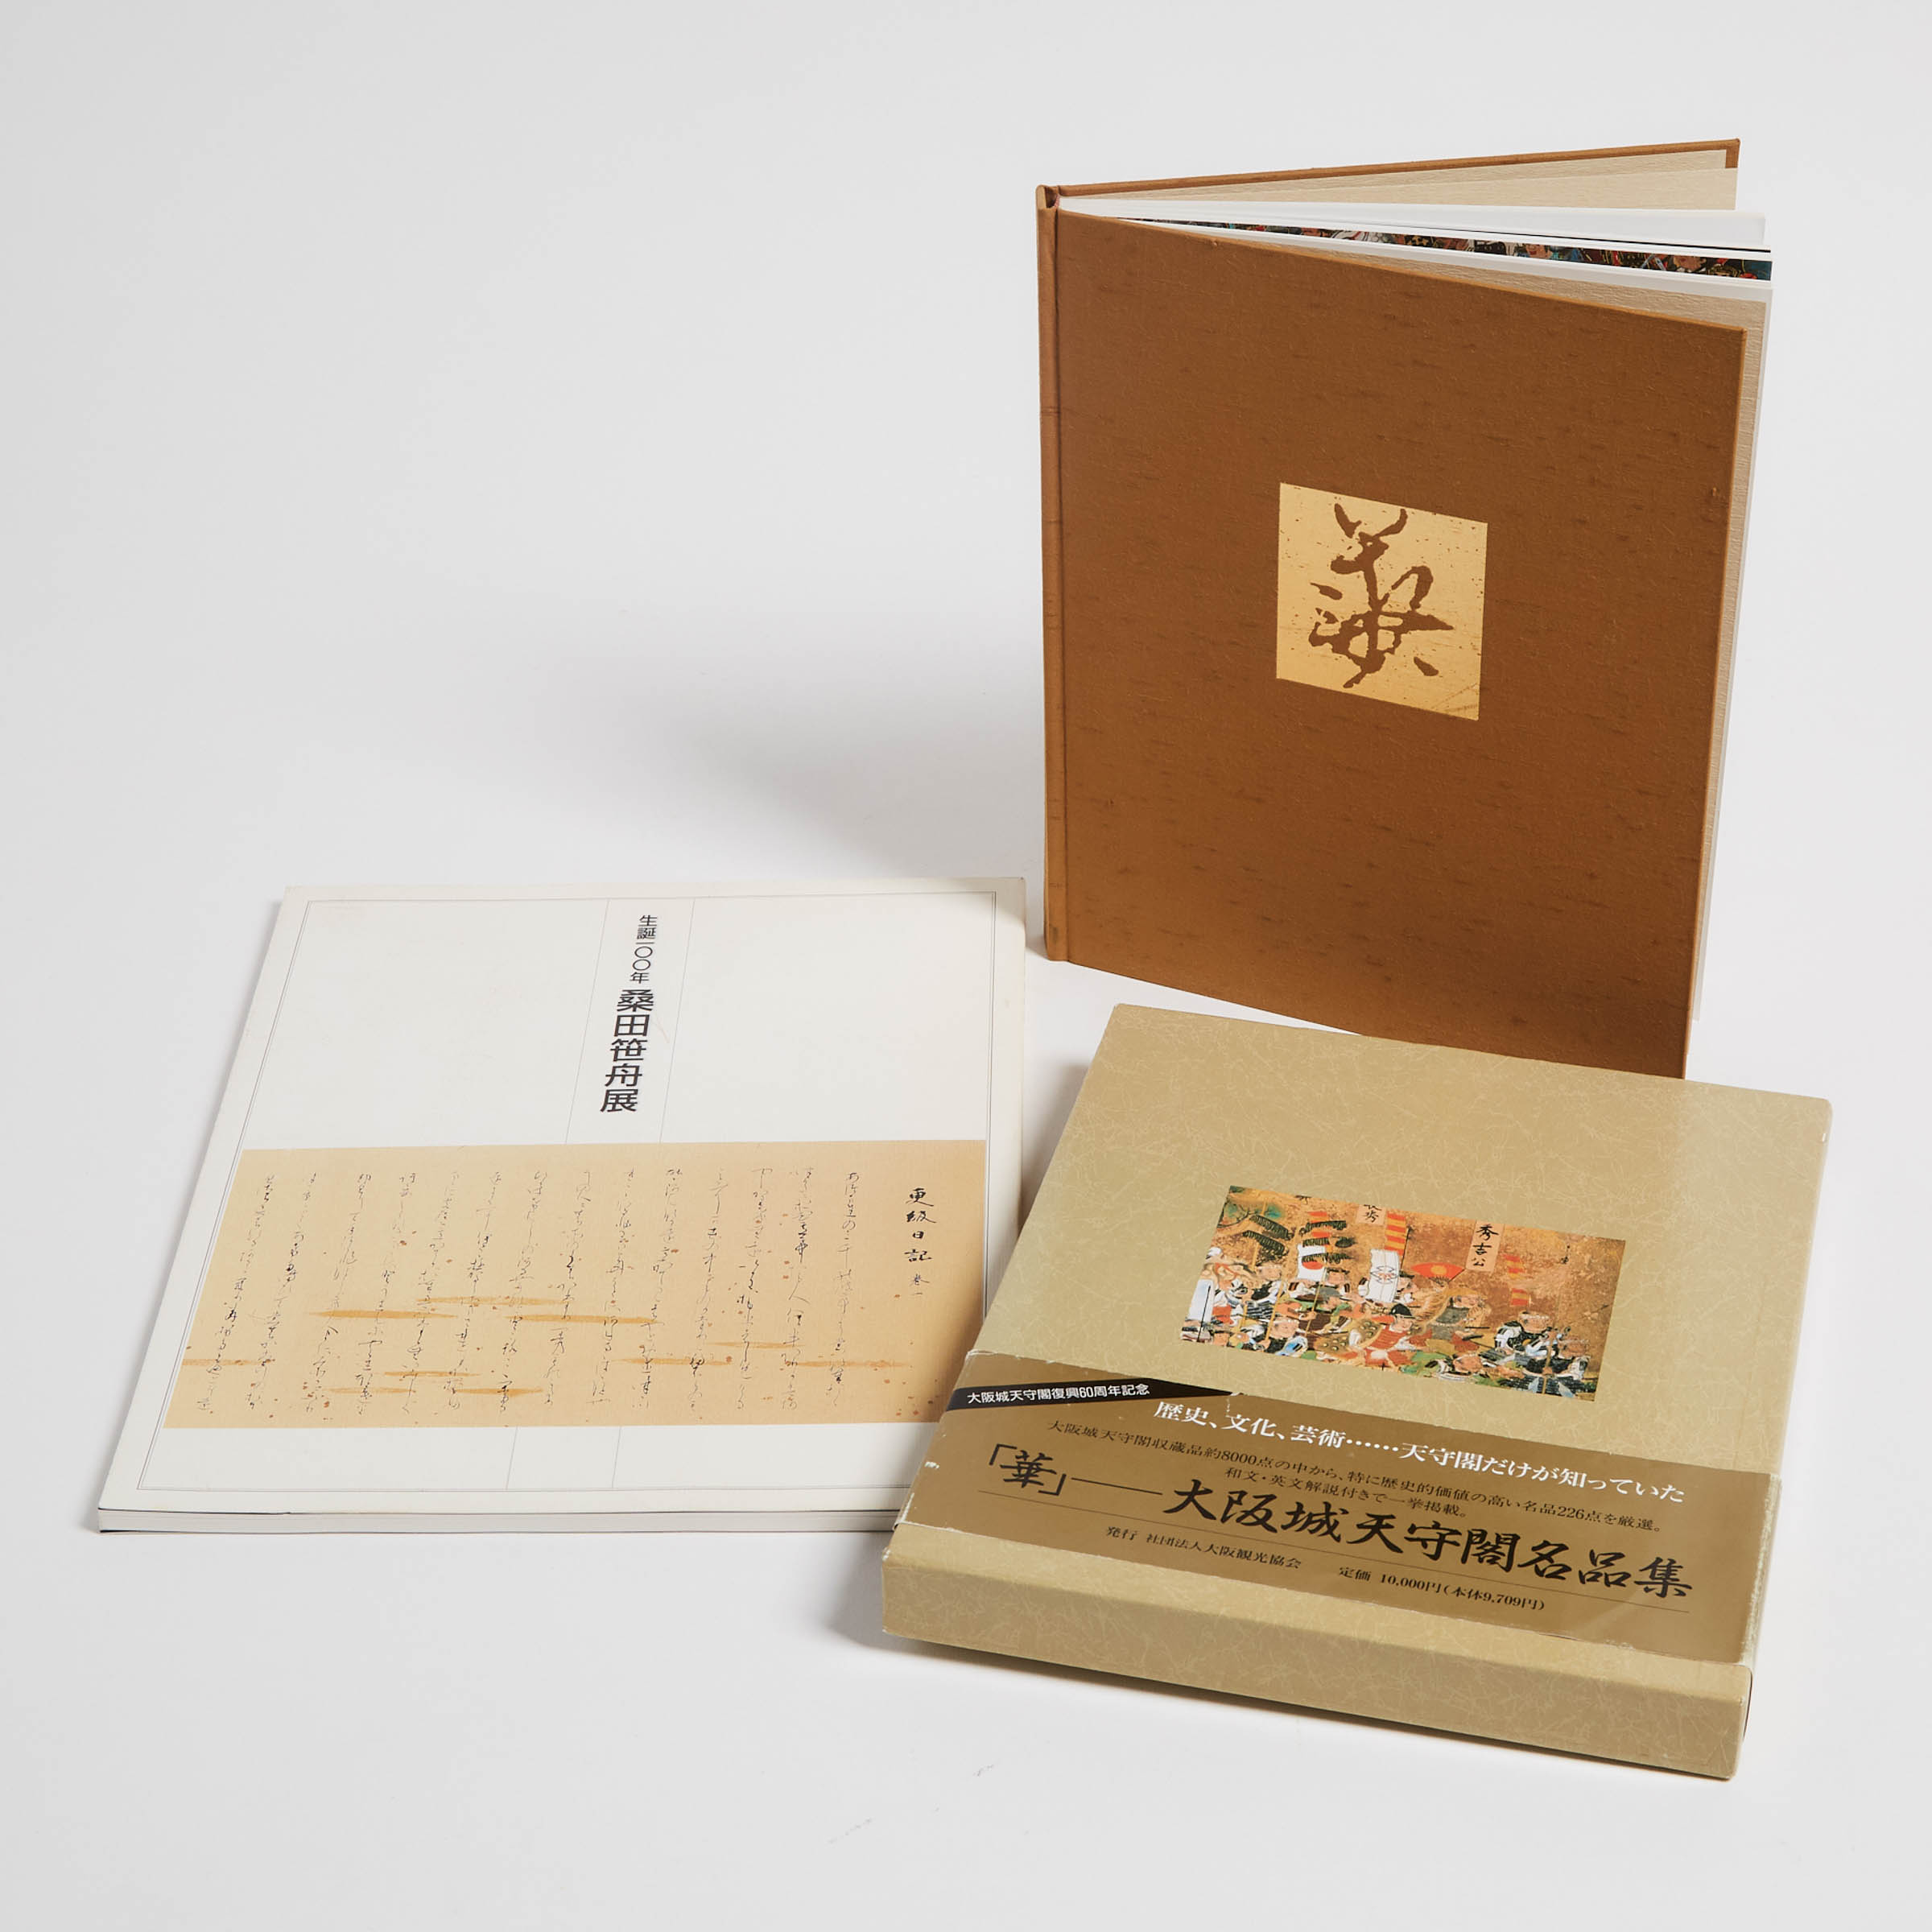 Collection Catalogues from the Osaka Castle Museum, 1991, and Fukuyama Museum of Art, 2002